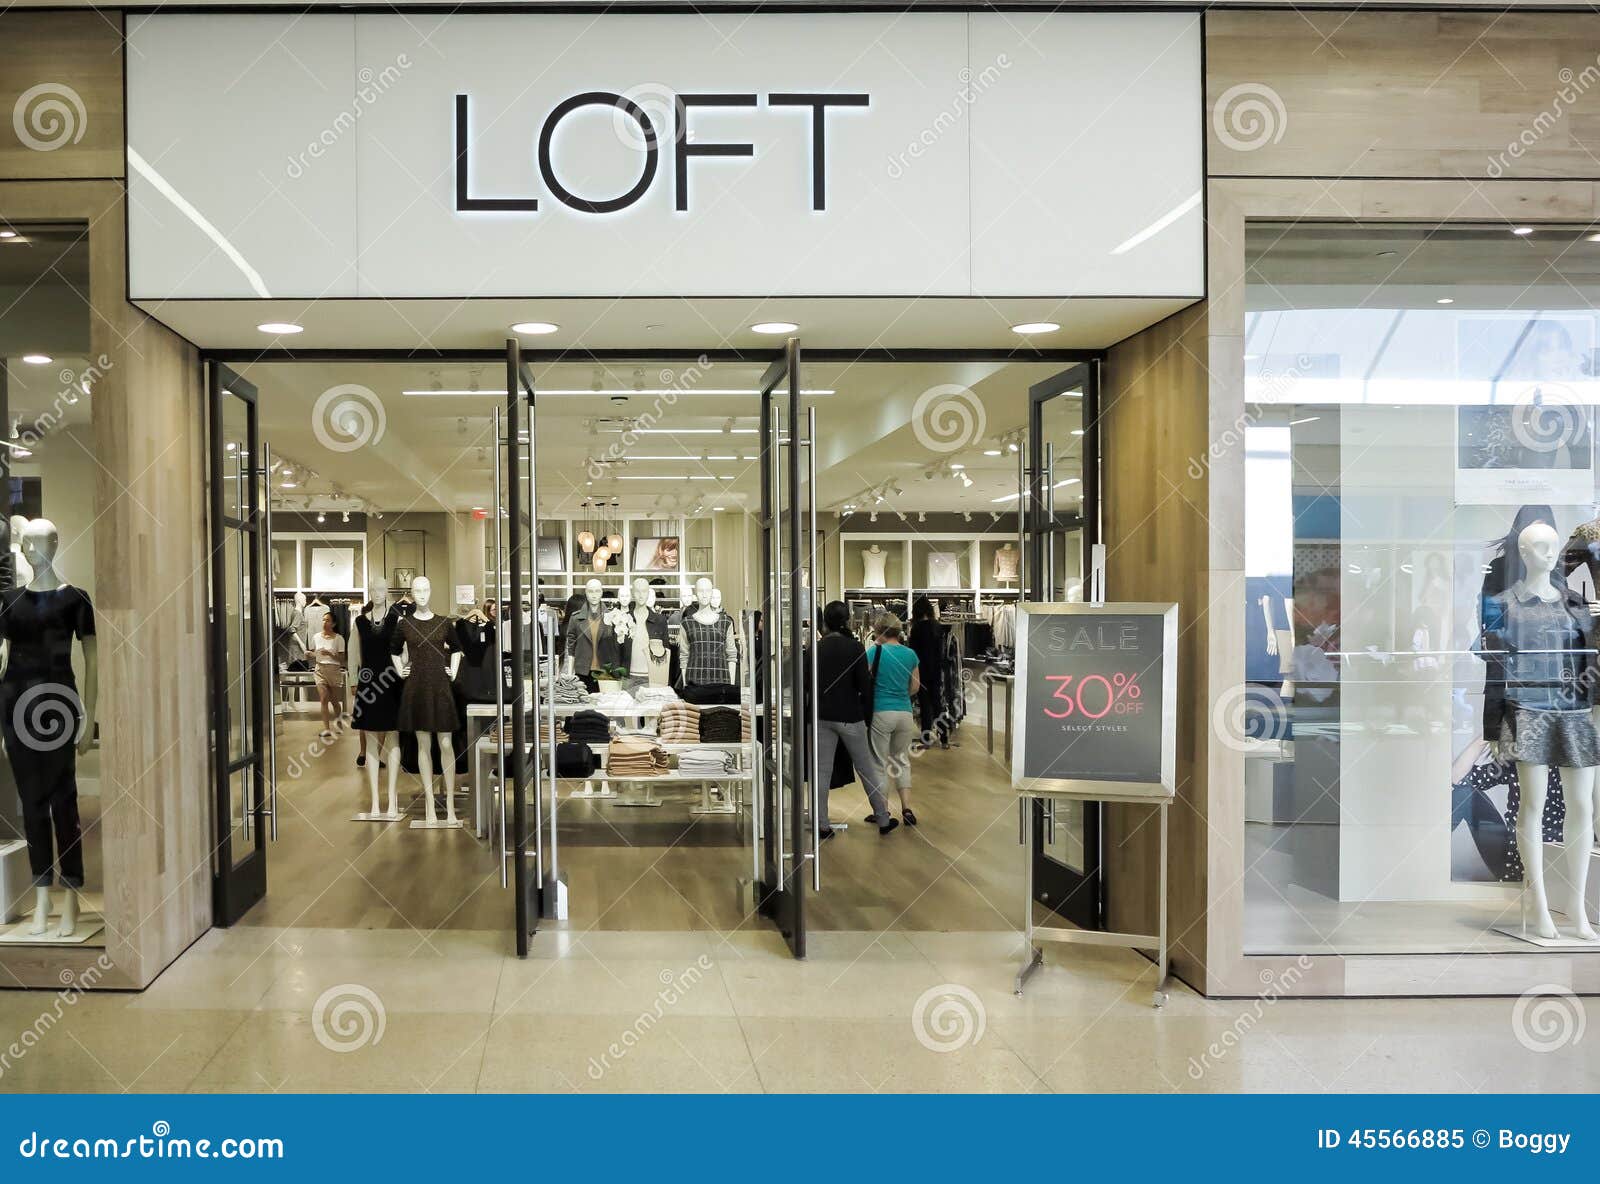 215 Loft Clothing Store Photos Free Royalty Free Stock Photos From Dreamstime [ 979 x 1300 Pixel ]